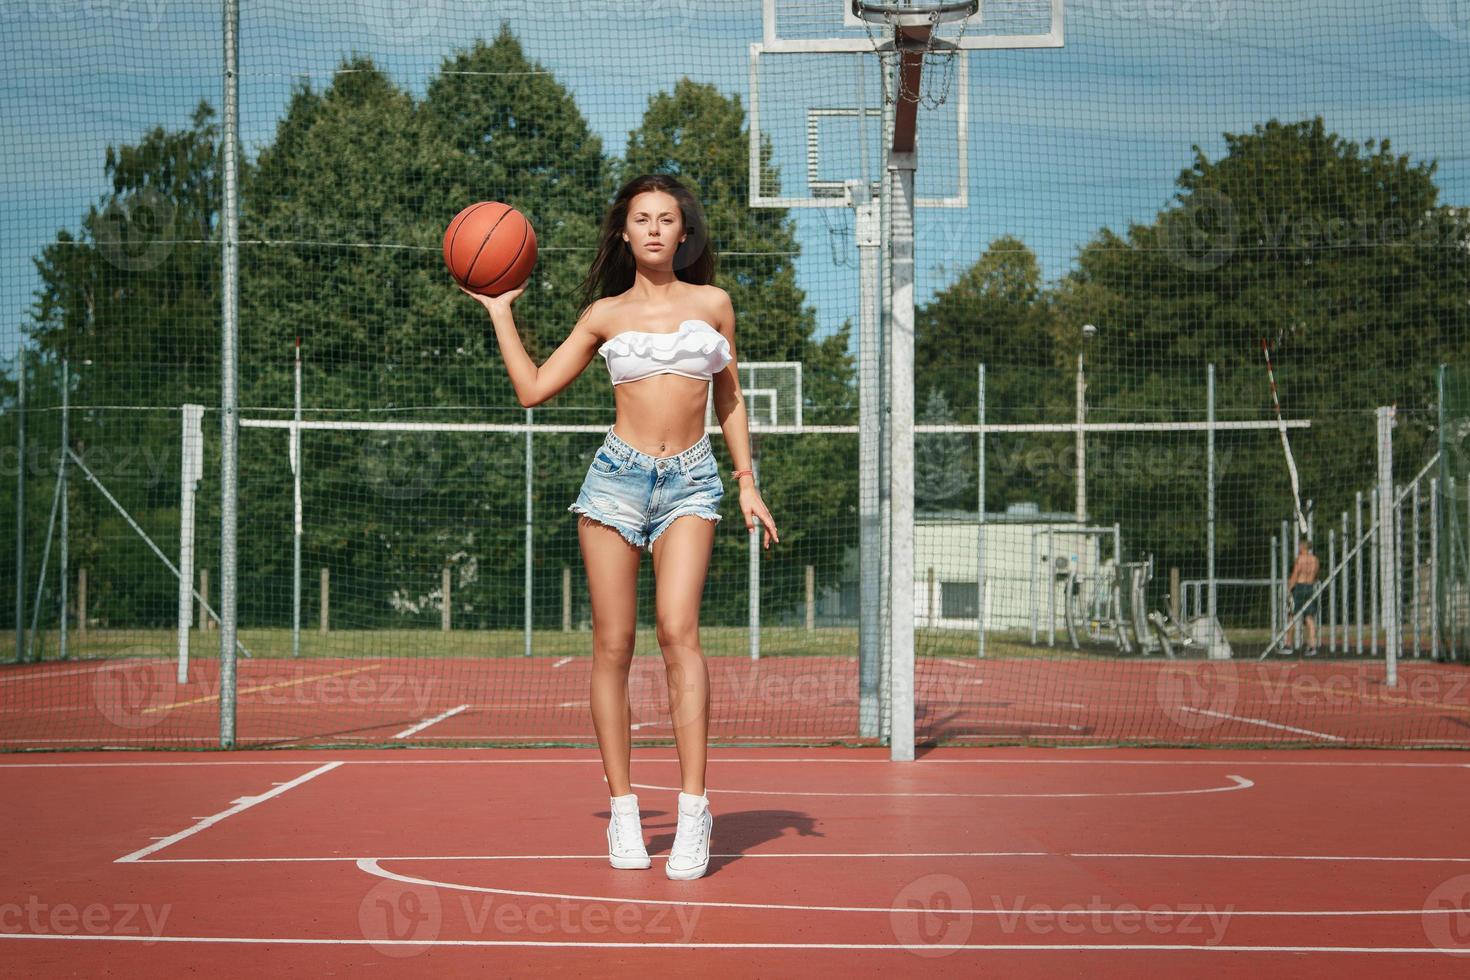 Young sexy woman with on a basketball playground photo